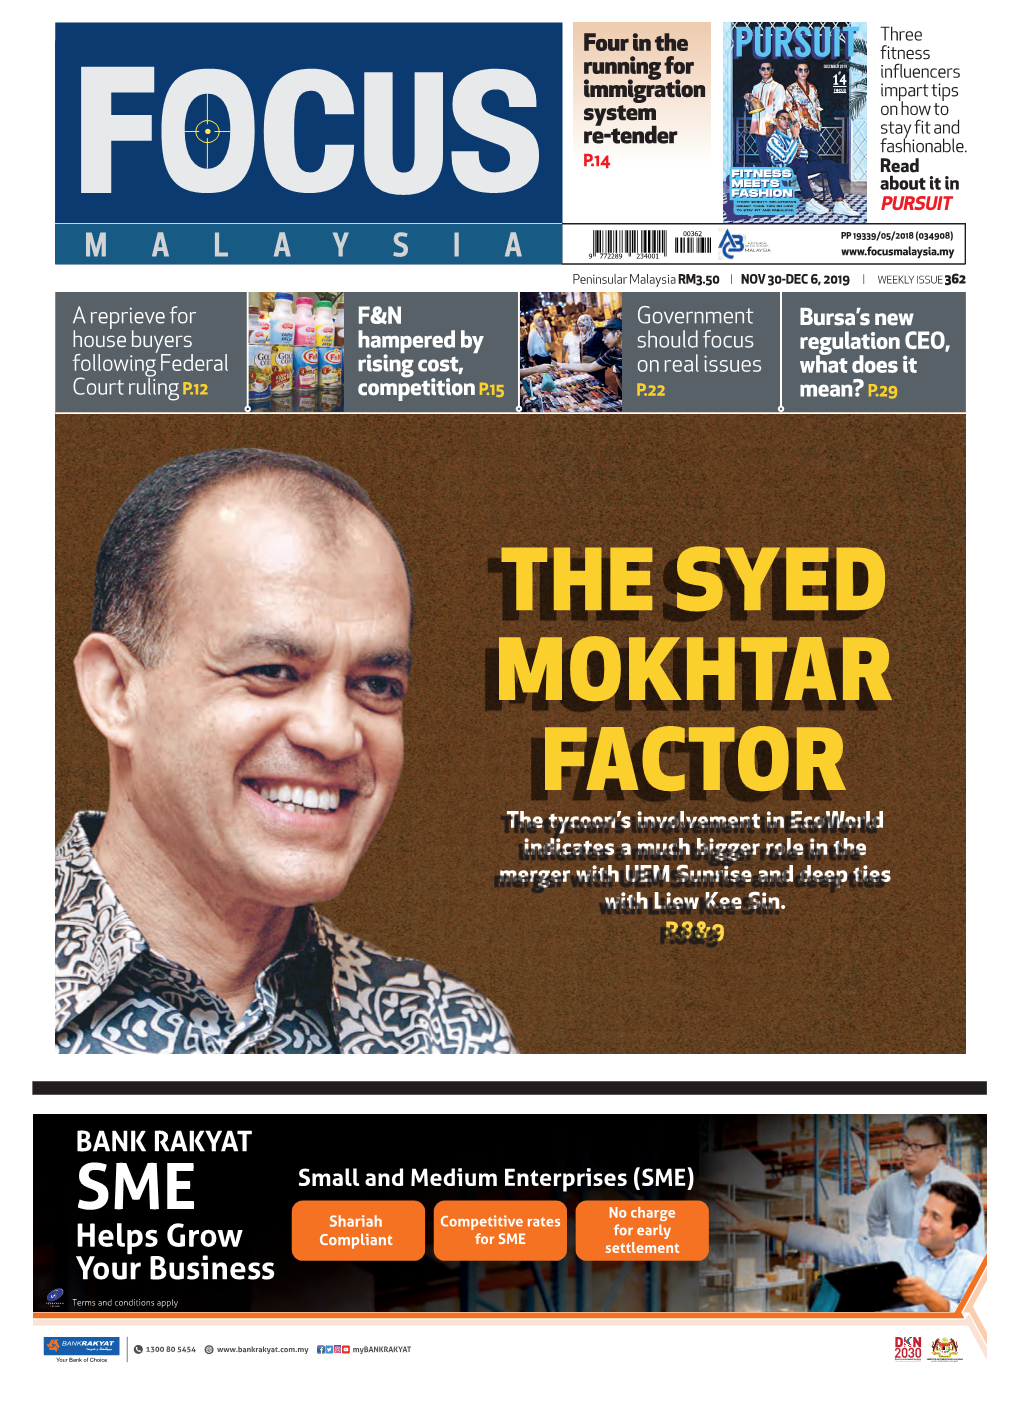 THE SYED MOKHTAR FACTOR the Tycoon’S Involvement in Ecoworld Indicates a Much Bigger Role in the Merger with UEM Sunrise and Deep Ties with Liew Kee Sin